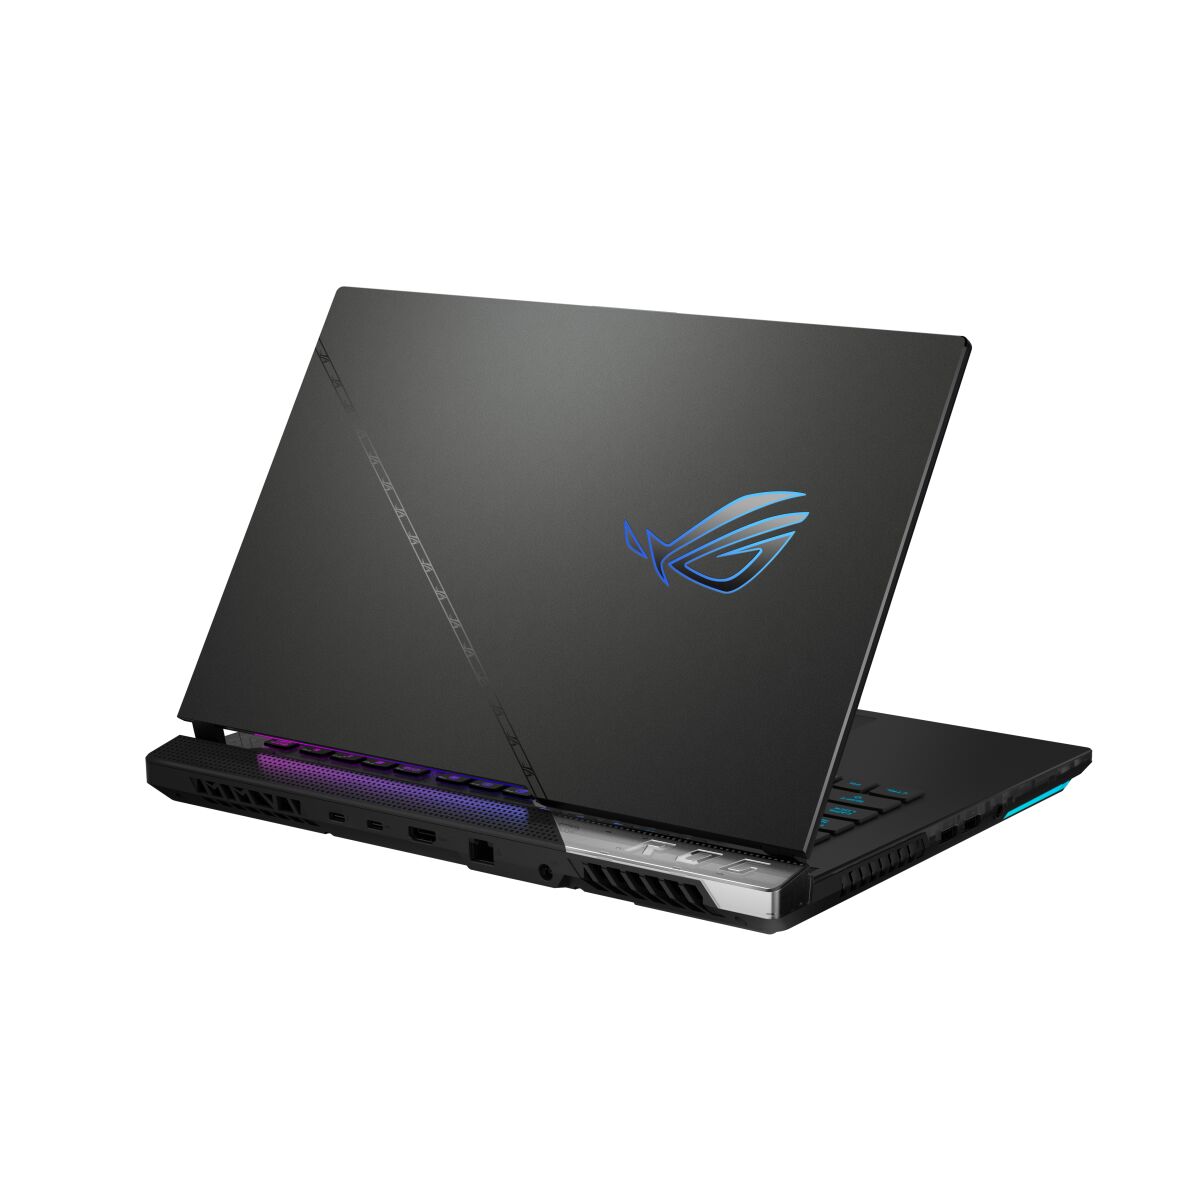 ASUS ROG G533ZX-LN060W-BE - 90NR08E2-M002X0 laptop specifications